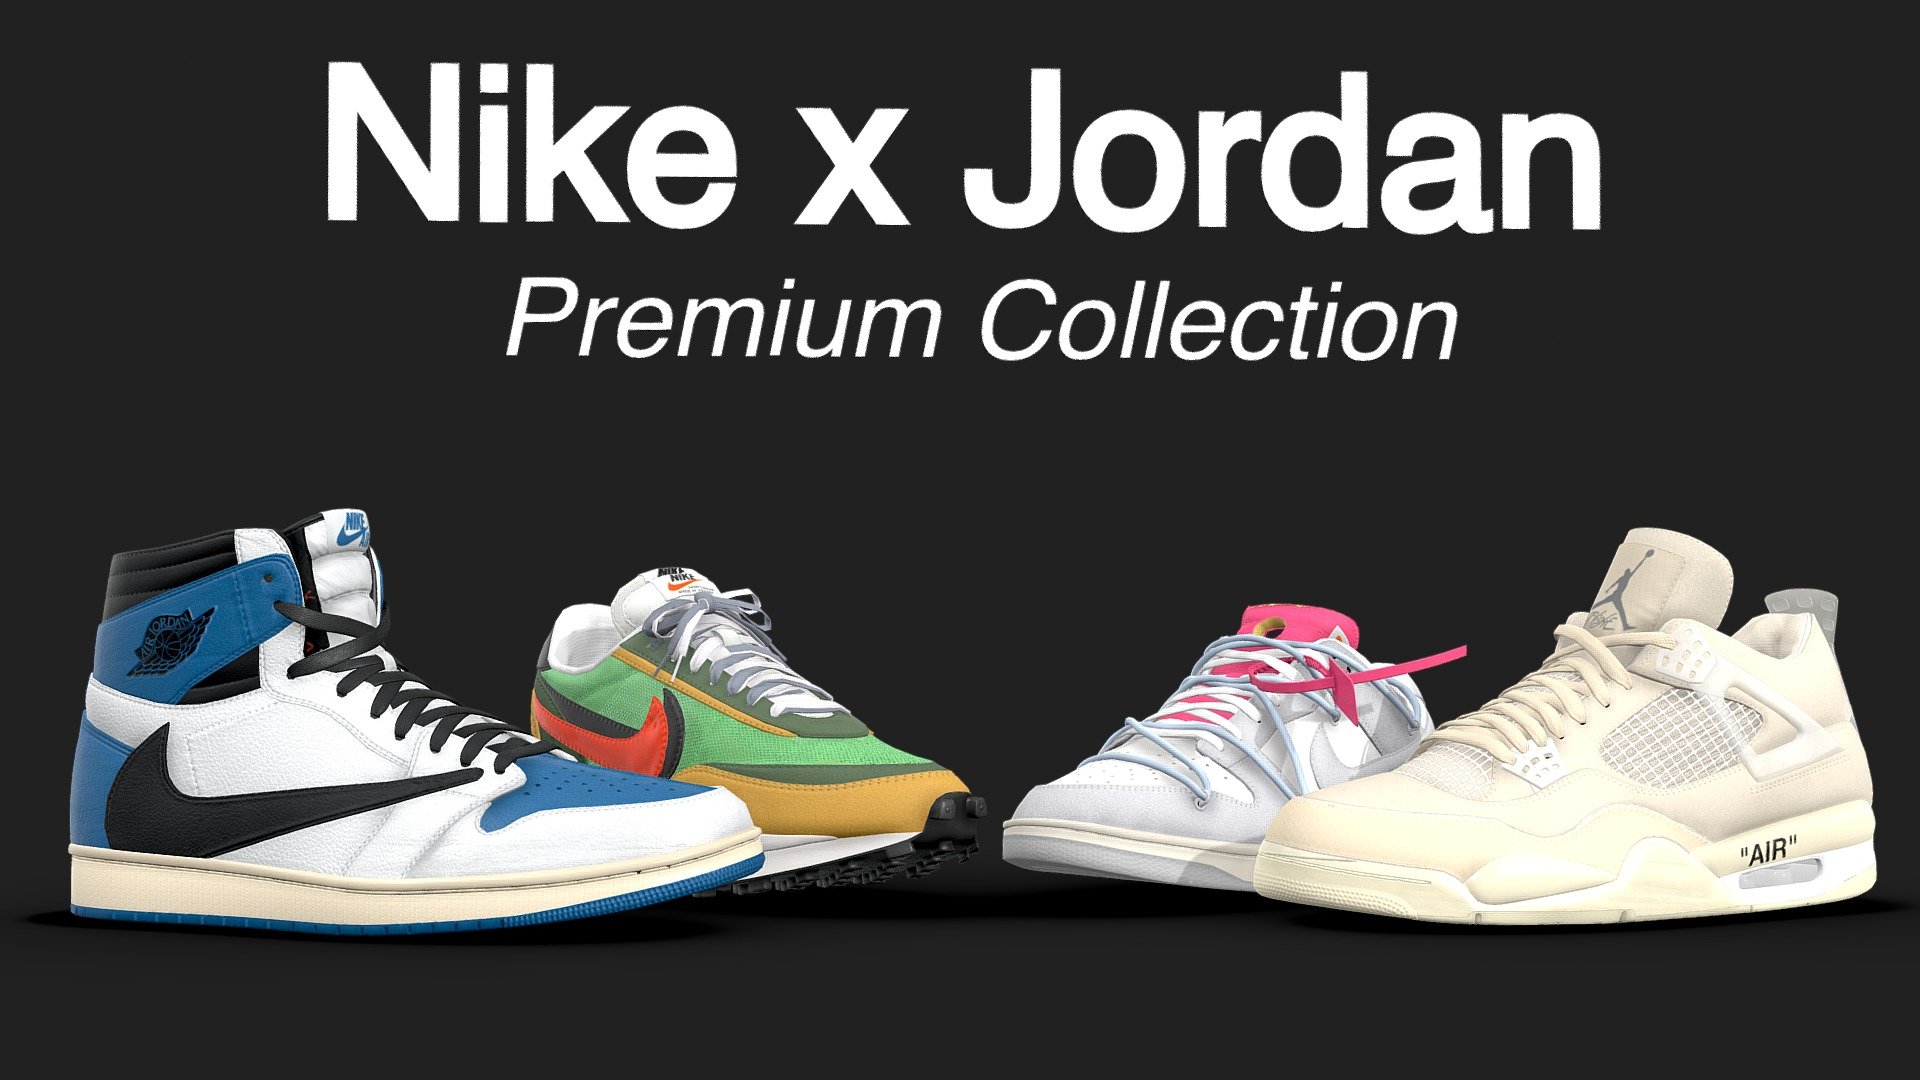 Collection of my Nike and Jordan shoes in various collaboration colourways. Featured in the preview are iconic Off White collabs, the classic Sacai LD Waffle, and the reverse swooshed Travis Scott x Fragment Jordan 1. In addition to these colourways, there is one bonus colourway for each model (pictured below) 

The models themselves are relatively low poly (Ranging from 21,525 faces for the Sacai to 30,114 faces for the Dunk, including the tag) and use one texture set per shoe. Their other shoe, along with the bonus colourways are available in the additonal files. 

In those additional files you get the blender file for each model along with fbx and obj versions, contact me if you require any other files. You can also find the high poly versions of all of these shoes on my store page. 

If you have any questions or general queries you can contact me here: worksofwall@gmail.com

 - Nike x Jordan Premium Collection - Buy Royalty Free 3D model by Joe-Wall (@joewall) 3d model